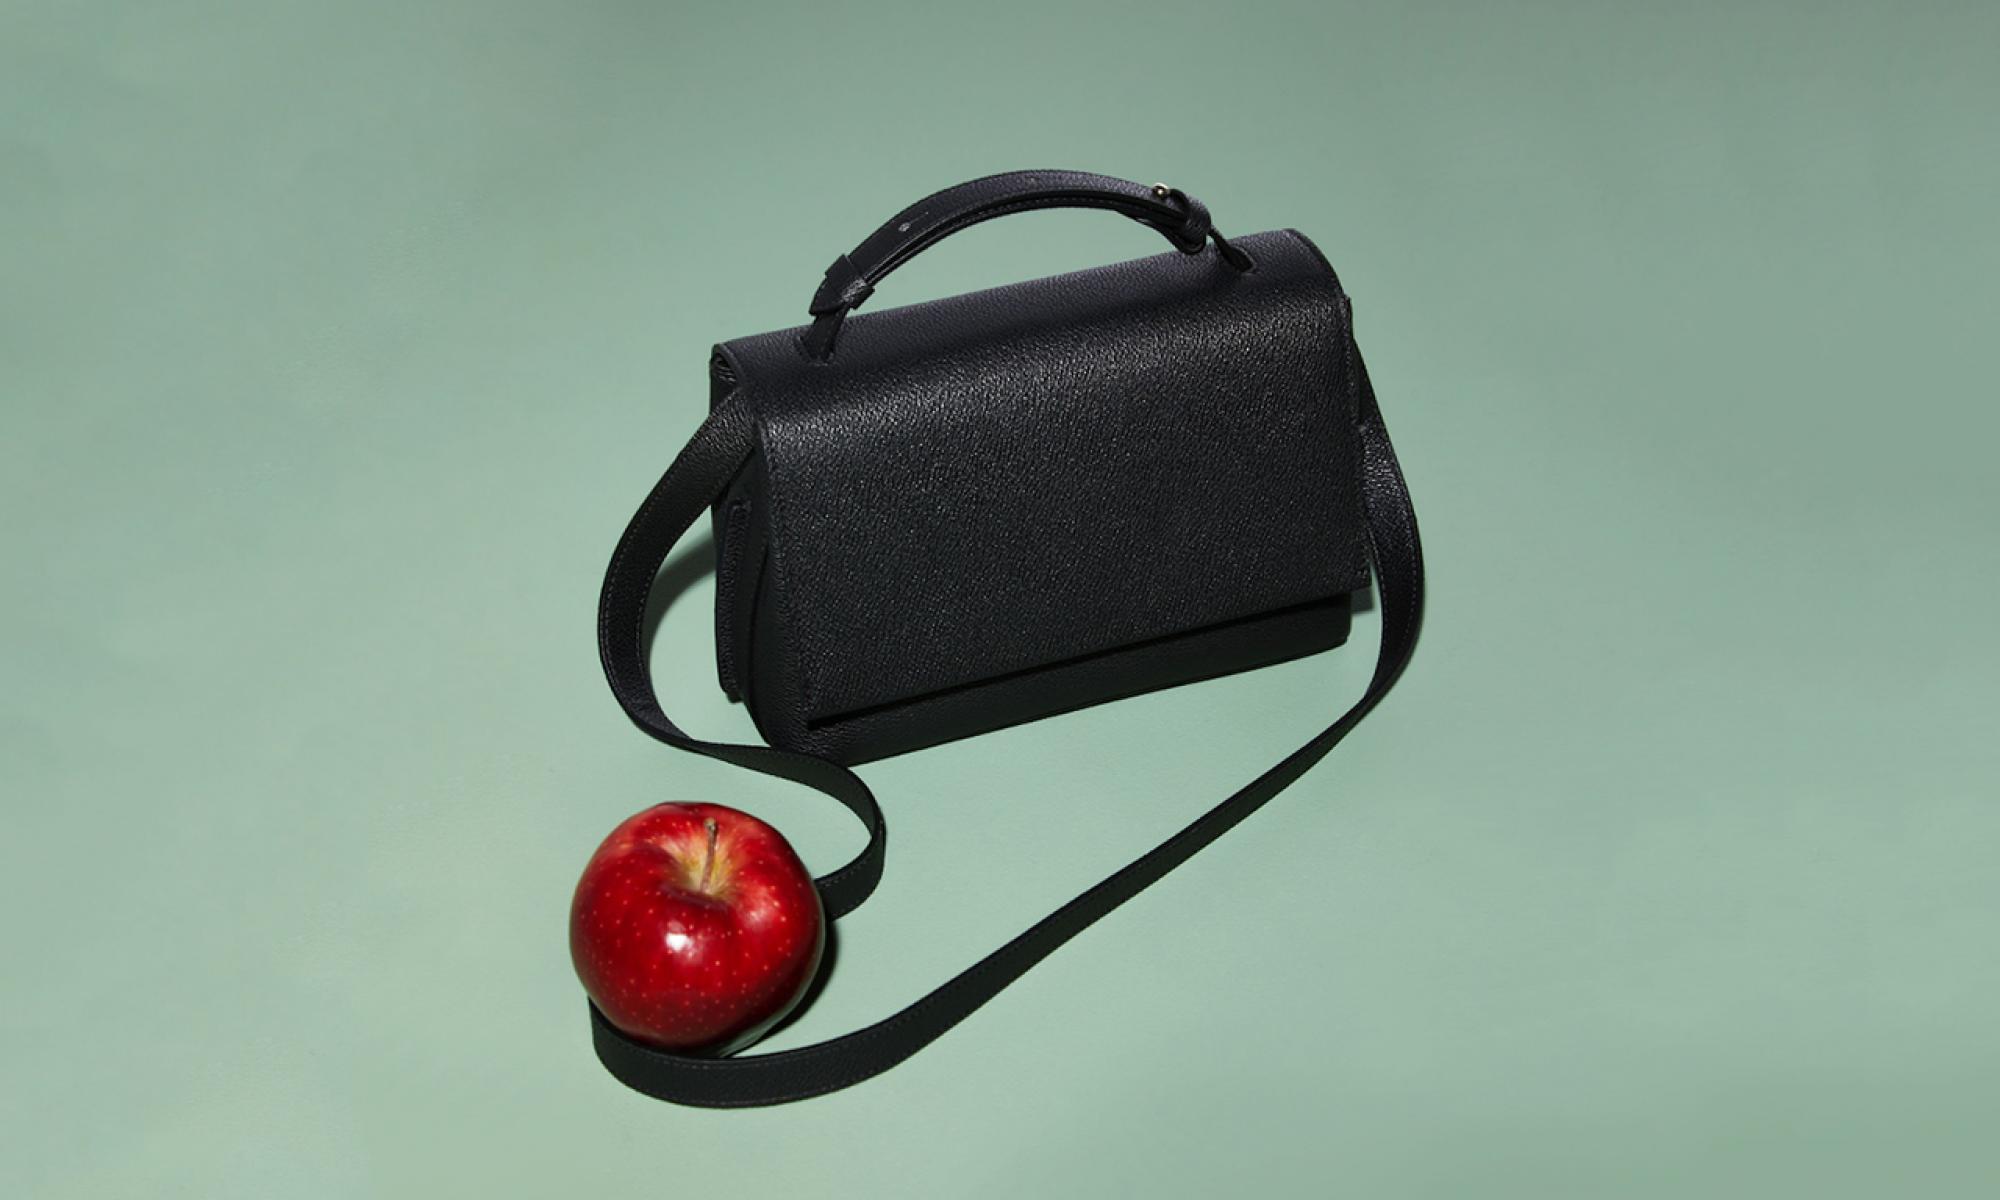 Black LUXTRA bag and an apple on mint green background